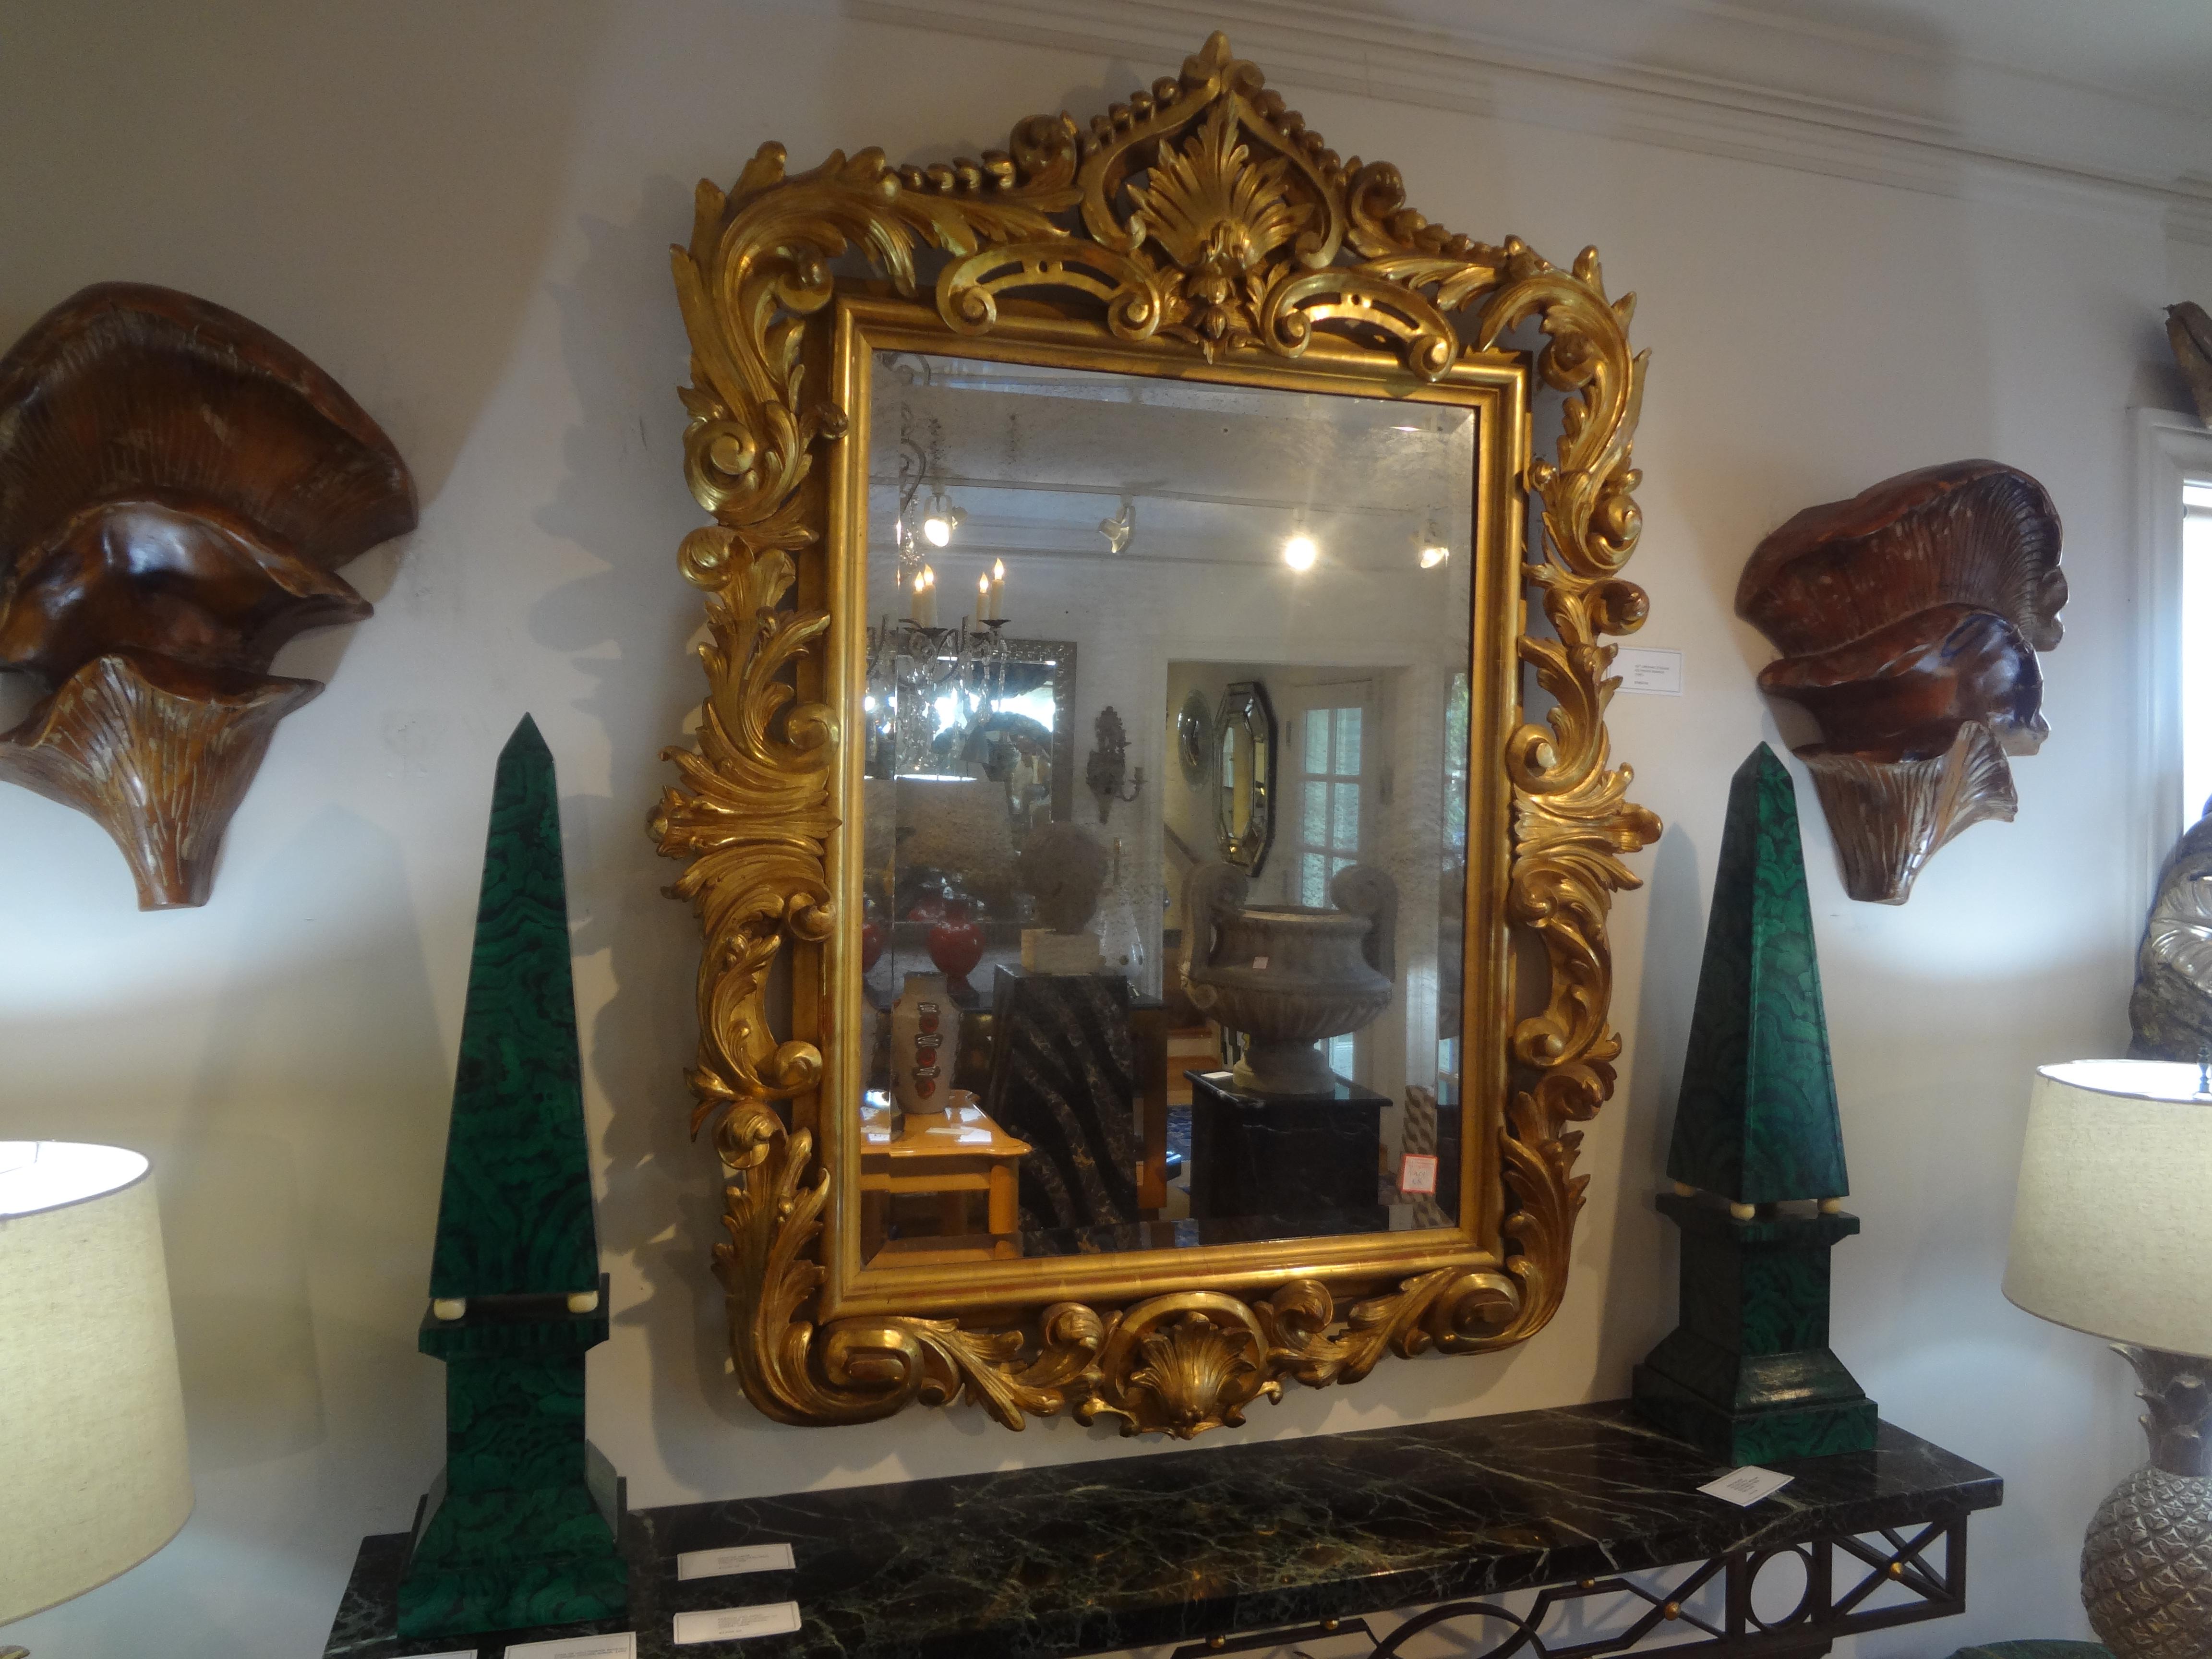 19th Century Italian Baroque Style Giltwood Mirror.
Our outstanding antique Italian Baroque style gilt wood beveled mirror retains the original mercury mirror and really makes a statement.
Stunning!